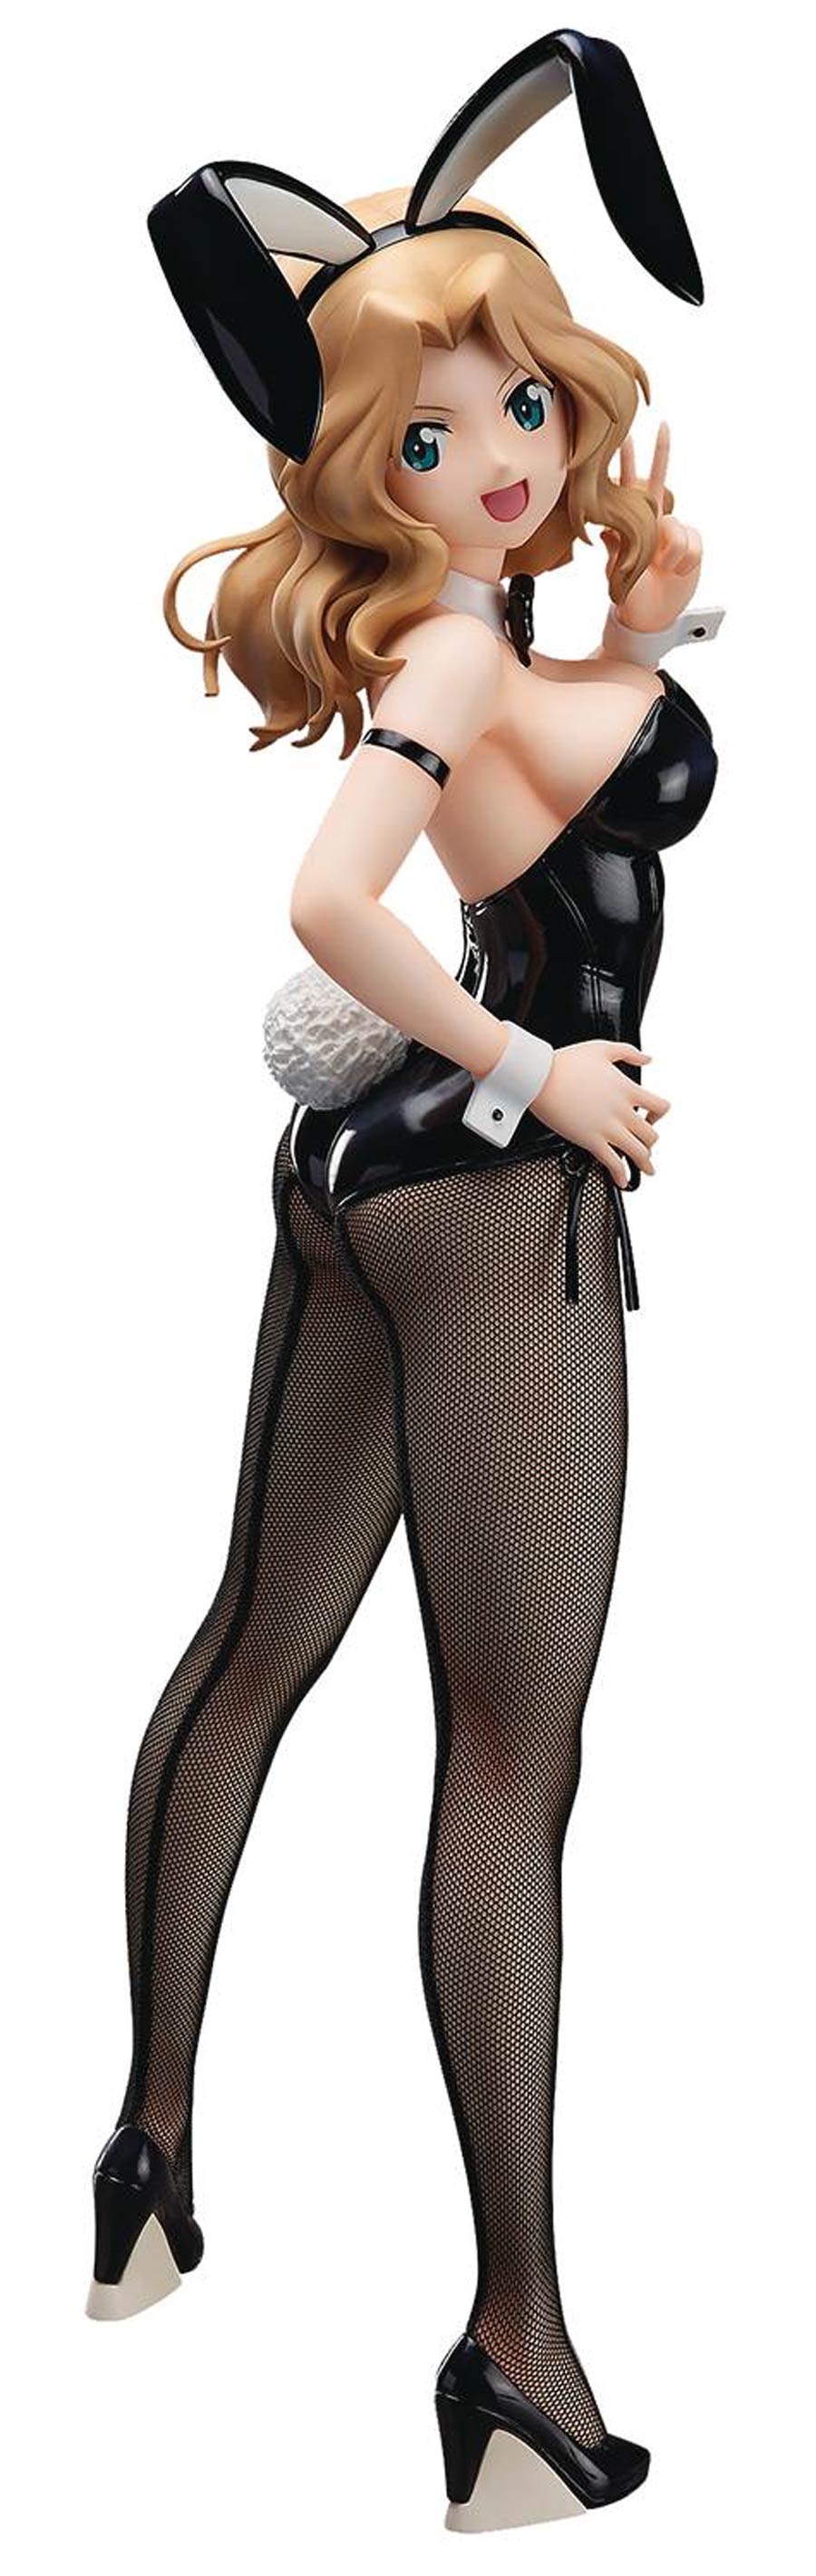 Girls Und Panzer Kei Bunny Outfit 1/4 Scale PVC Figure